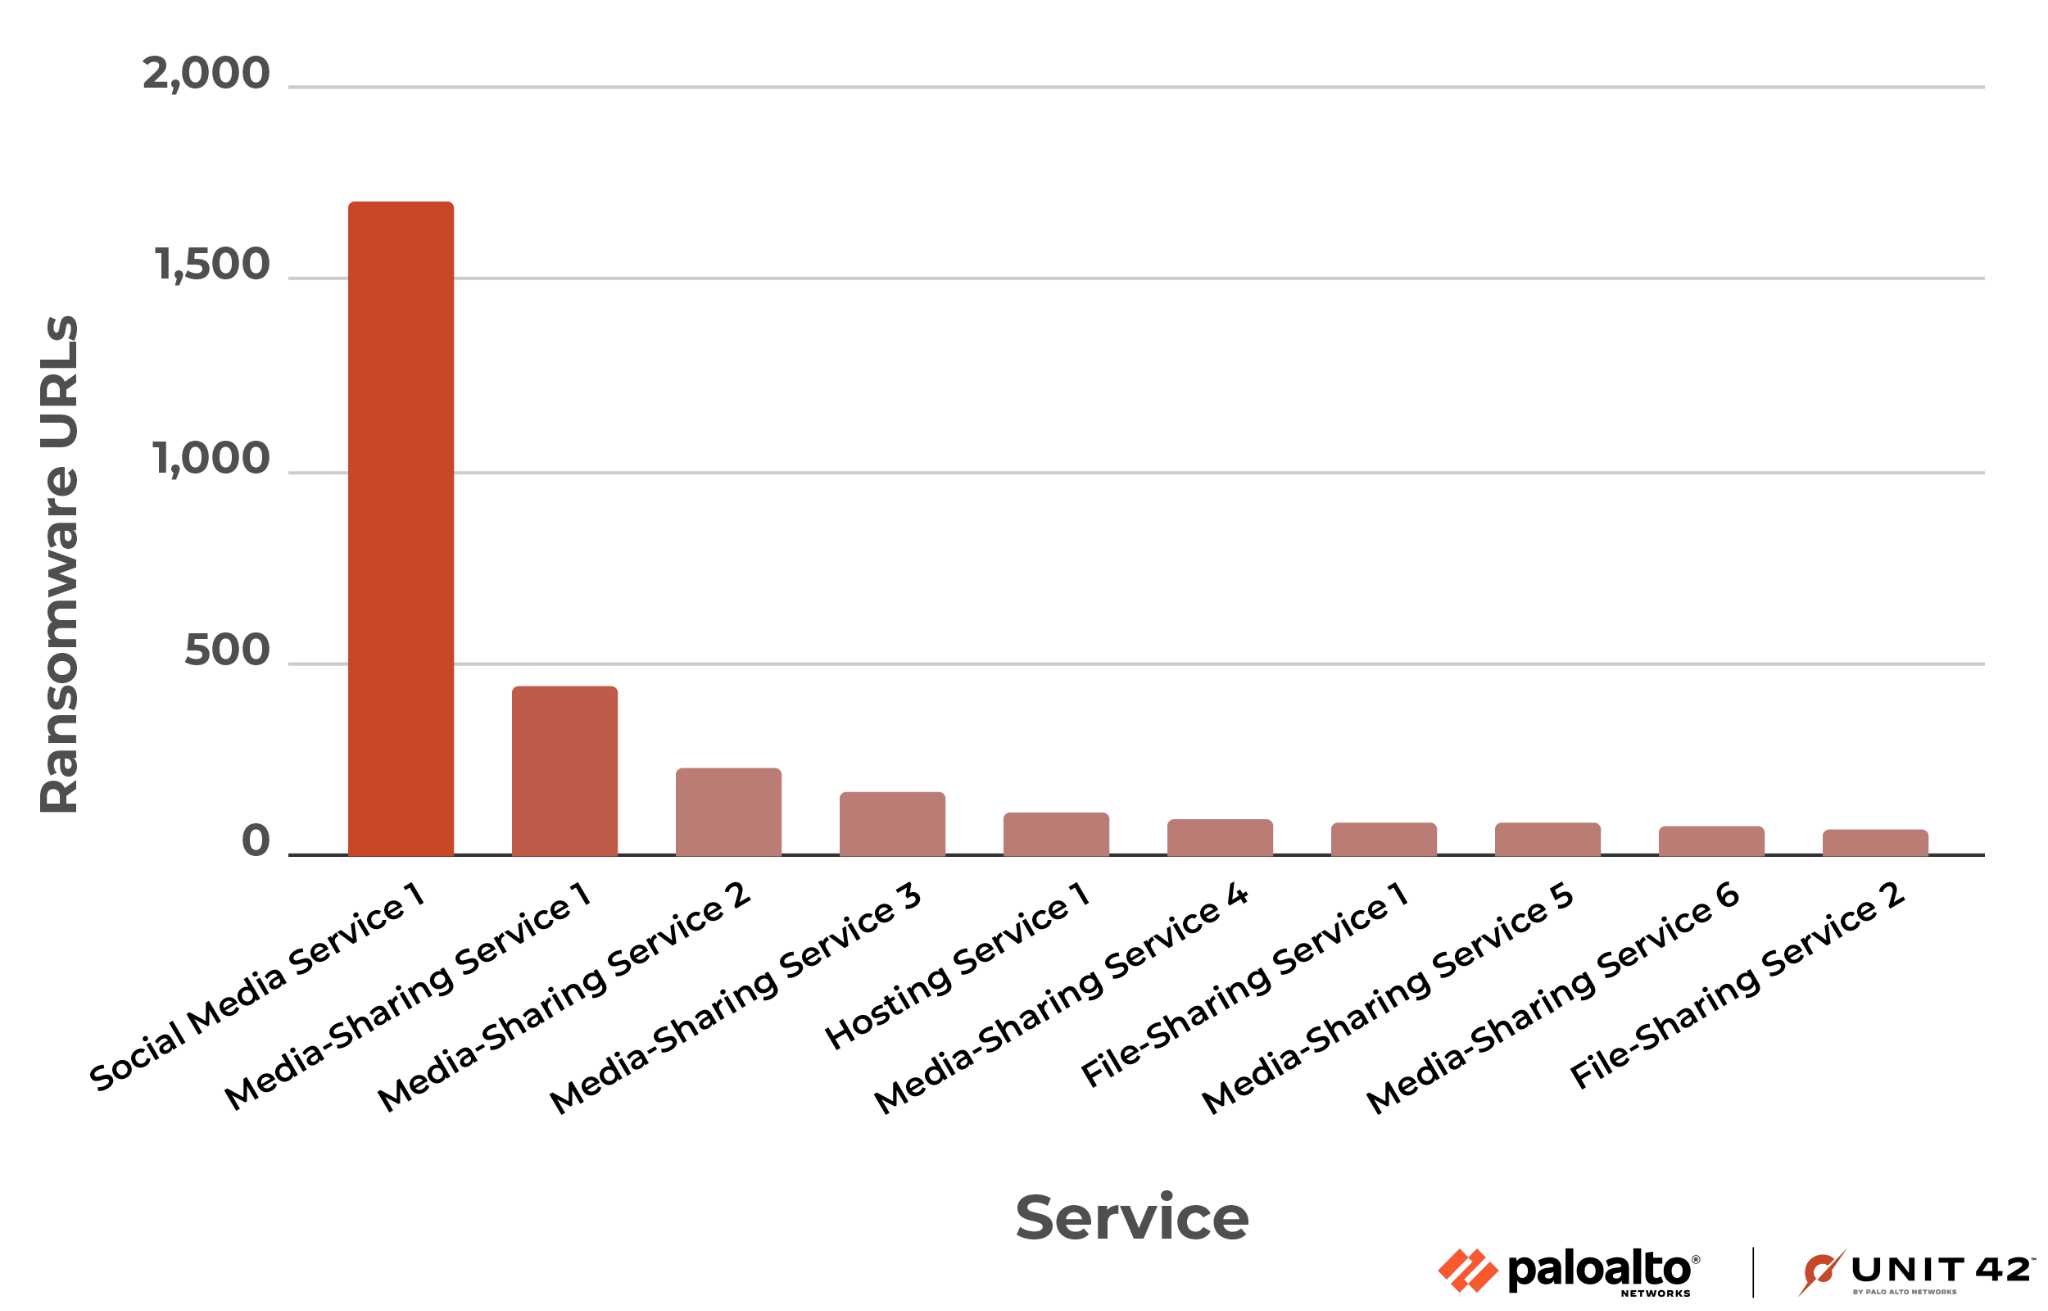 Image 4 is a graph of the most commonly abused public hosting, social media and sharing services. The largest percentage is the first social media service at over 1500 ransomware URLs. The second is a media sharing service, and the rest of the media sharing, file sharing, and hosting services are distributed more evenly.